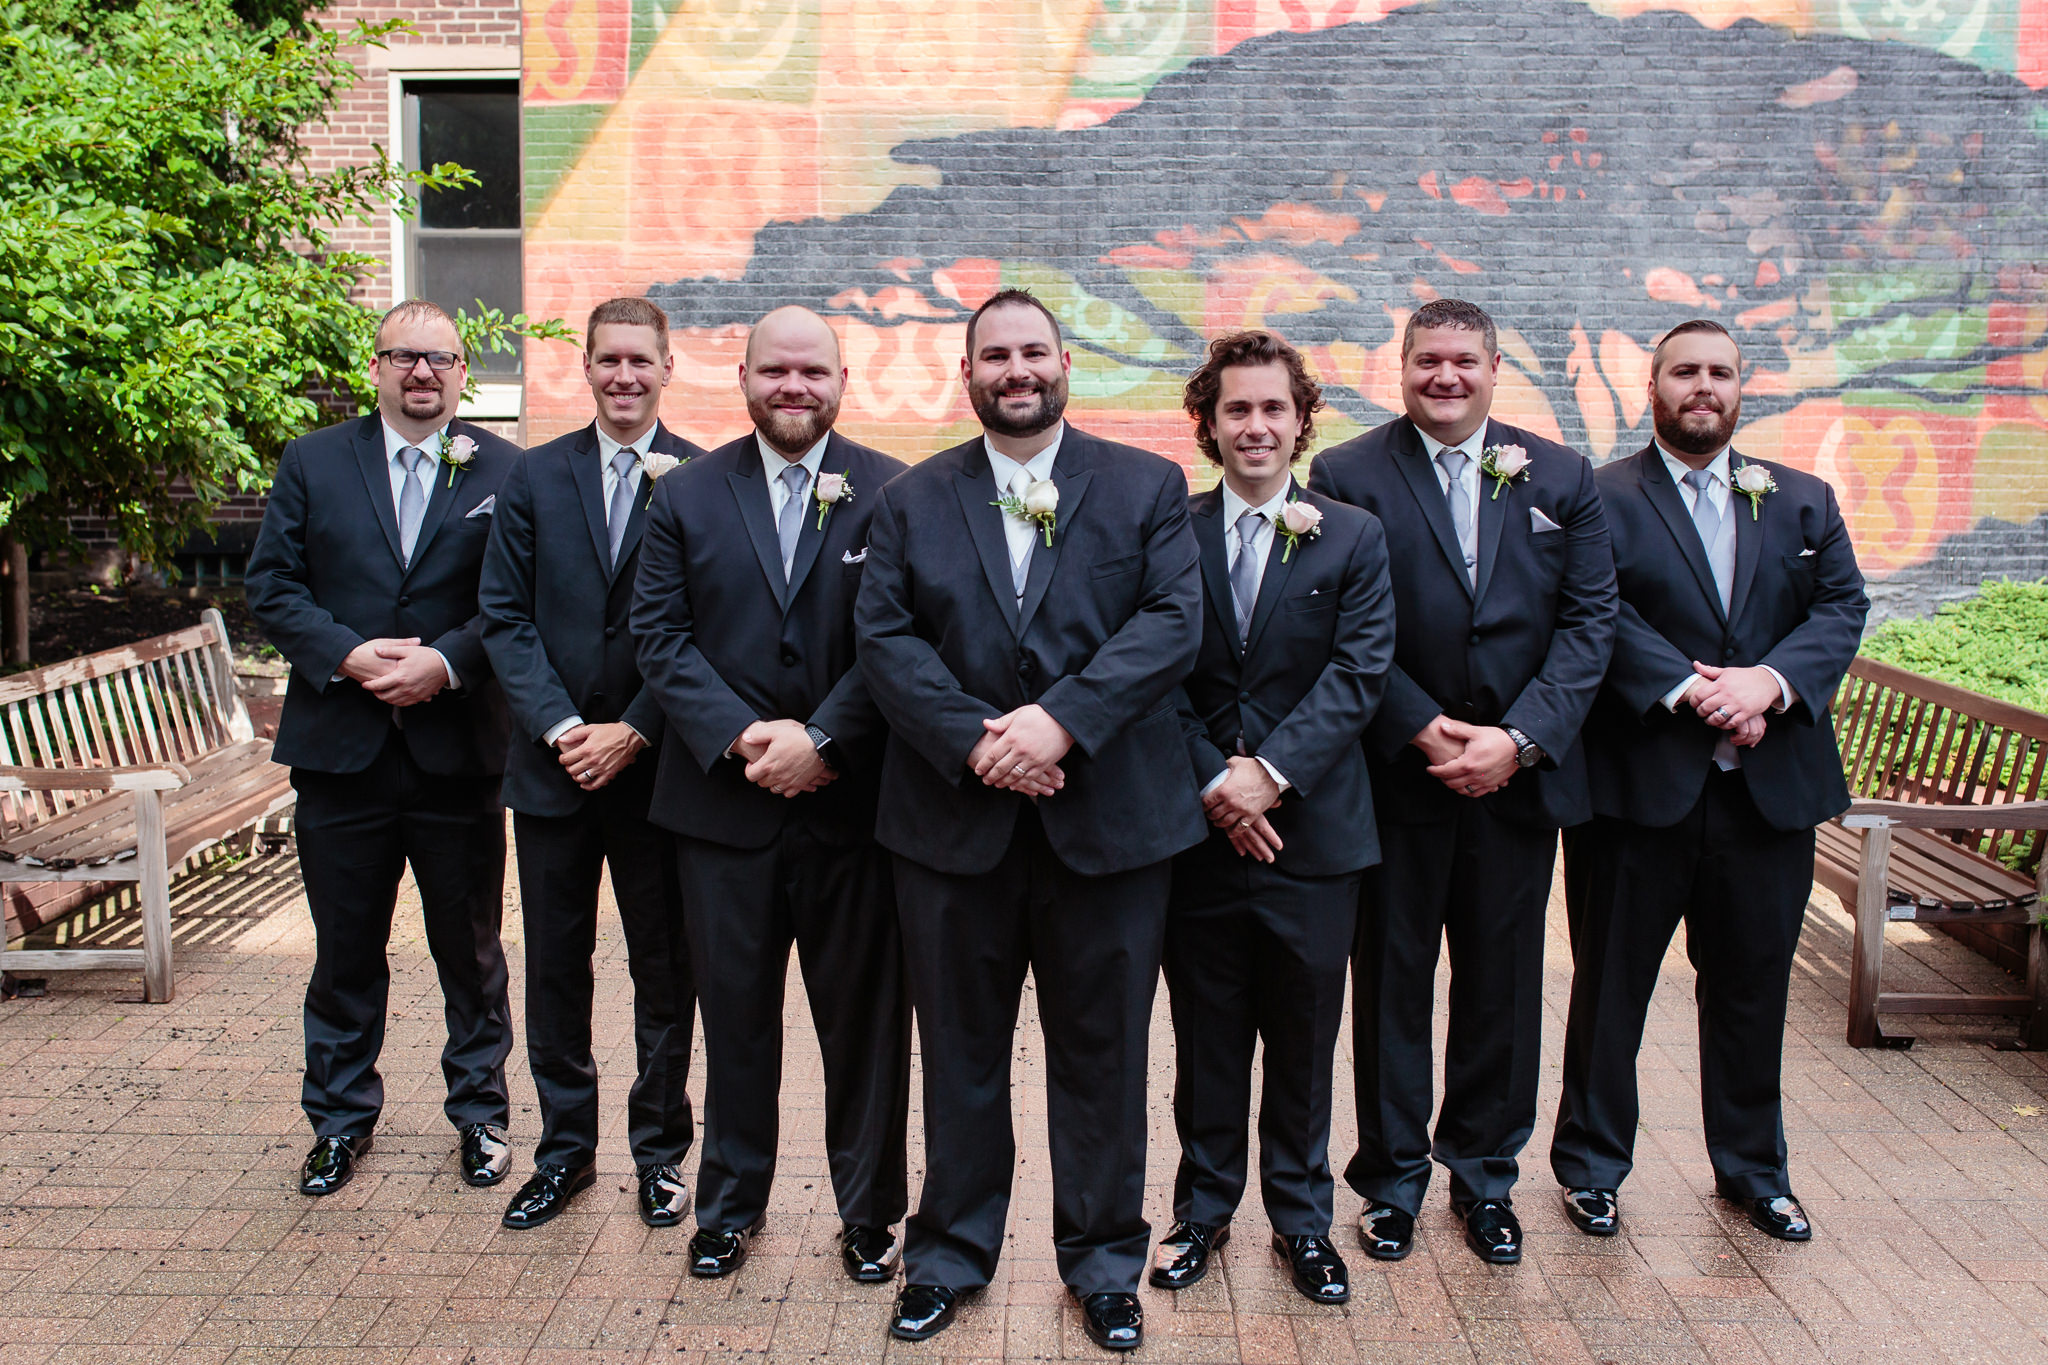 Groomsmen in front of wall mural at Duquesne University